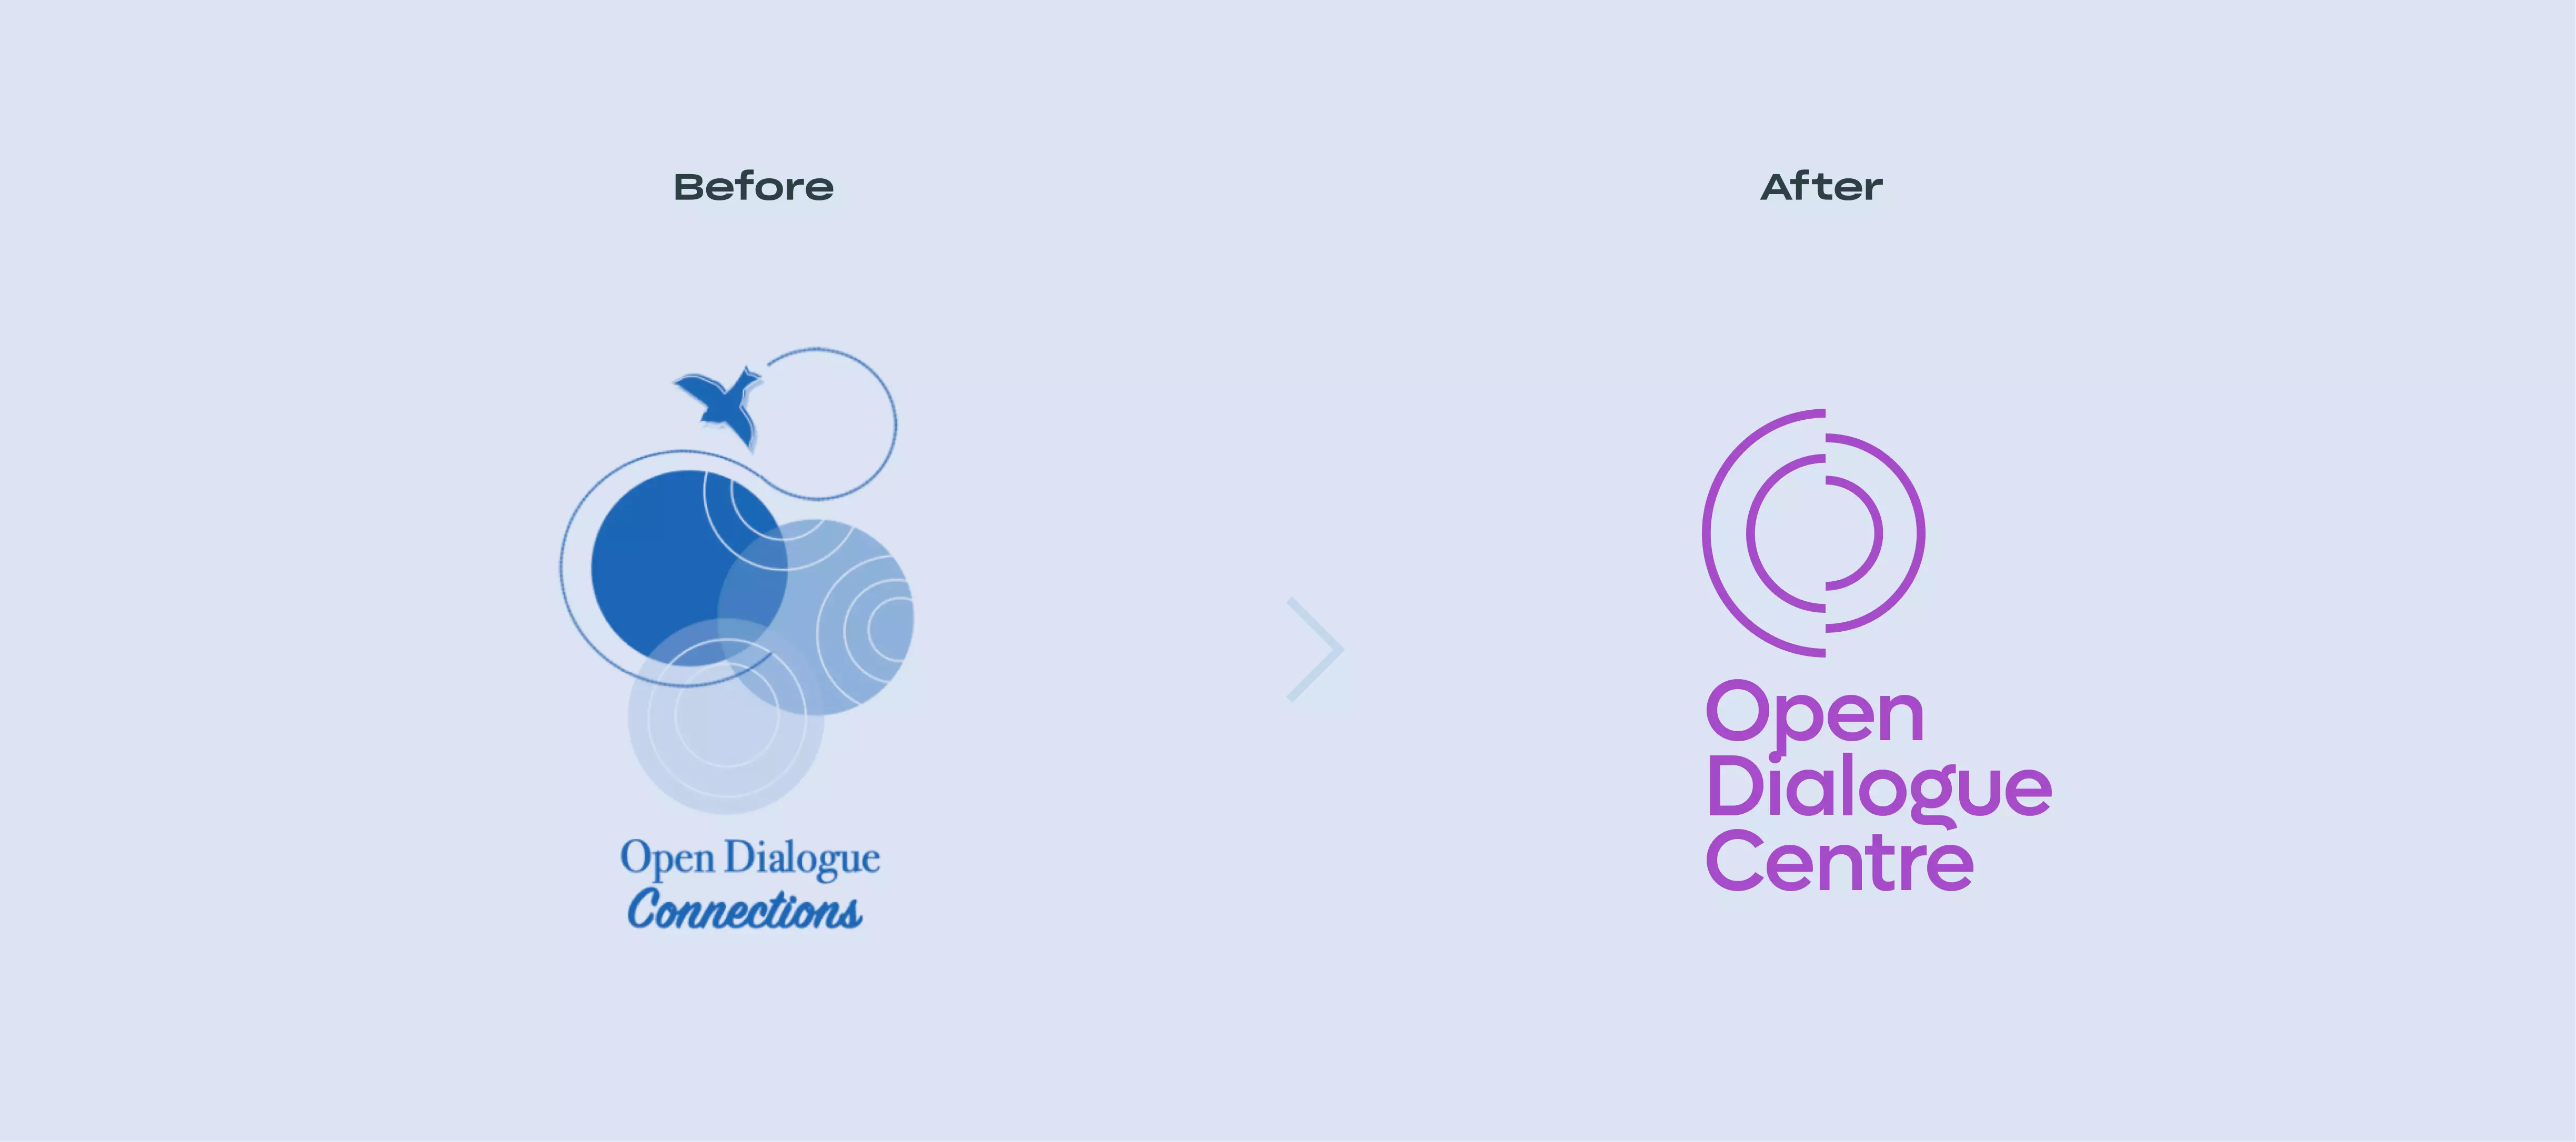 Open Dialogue Centre Branding Before and After